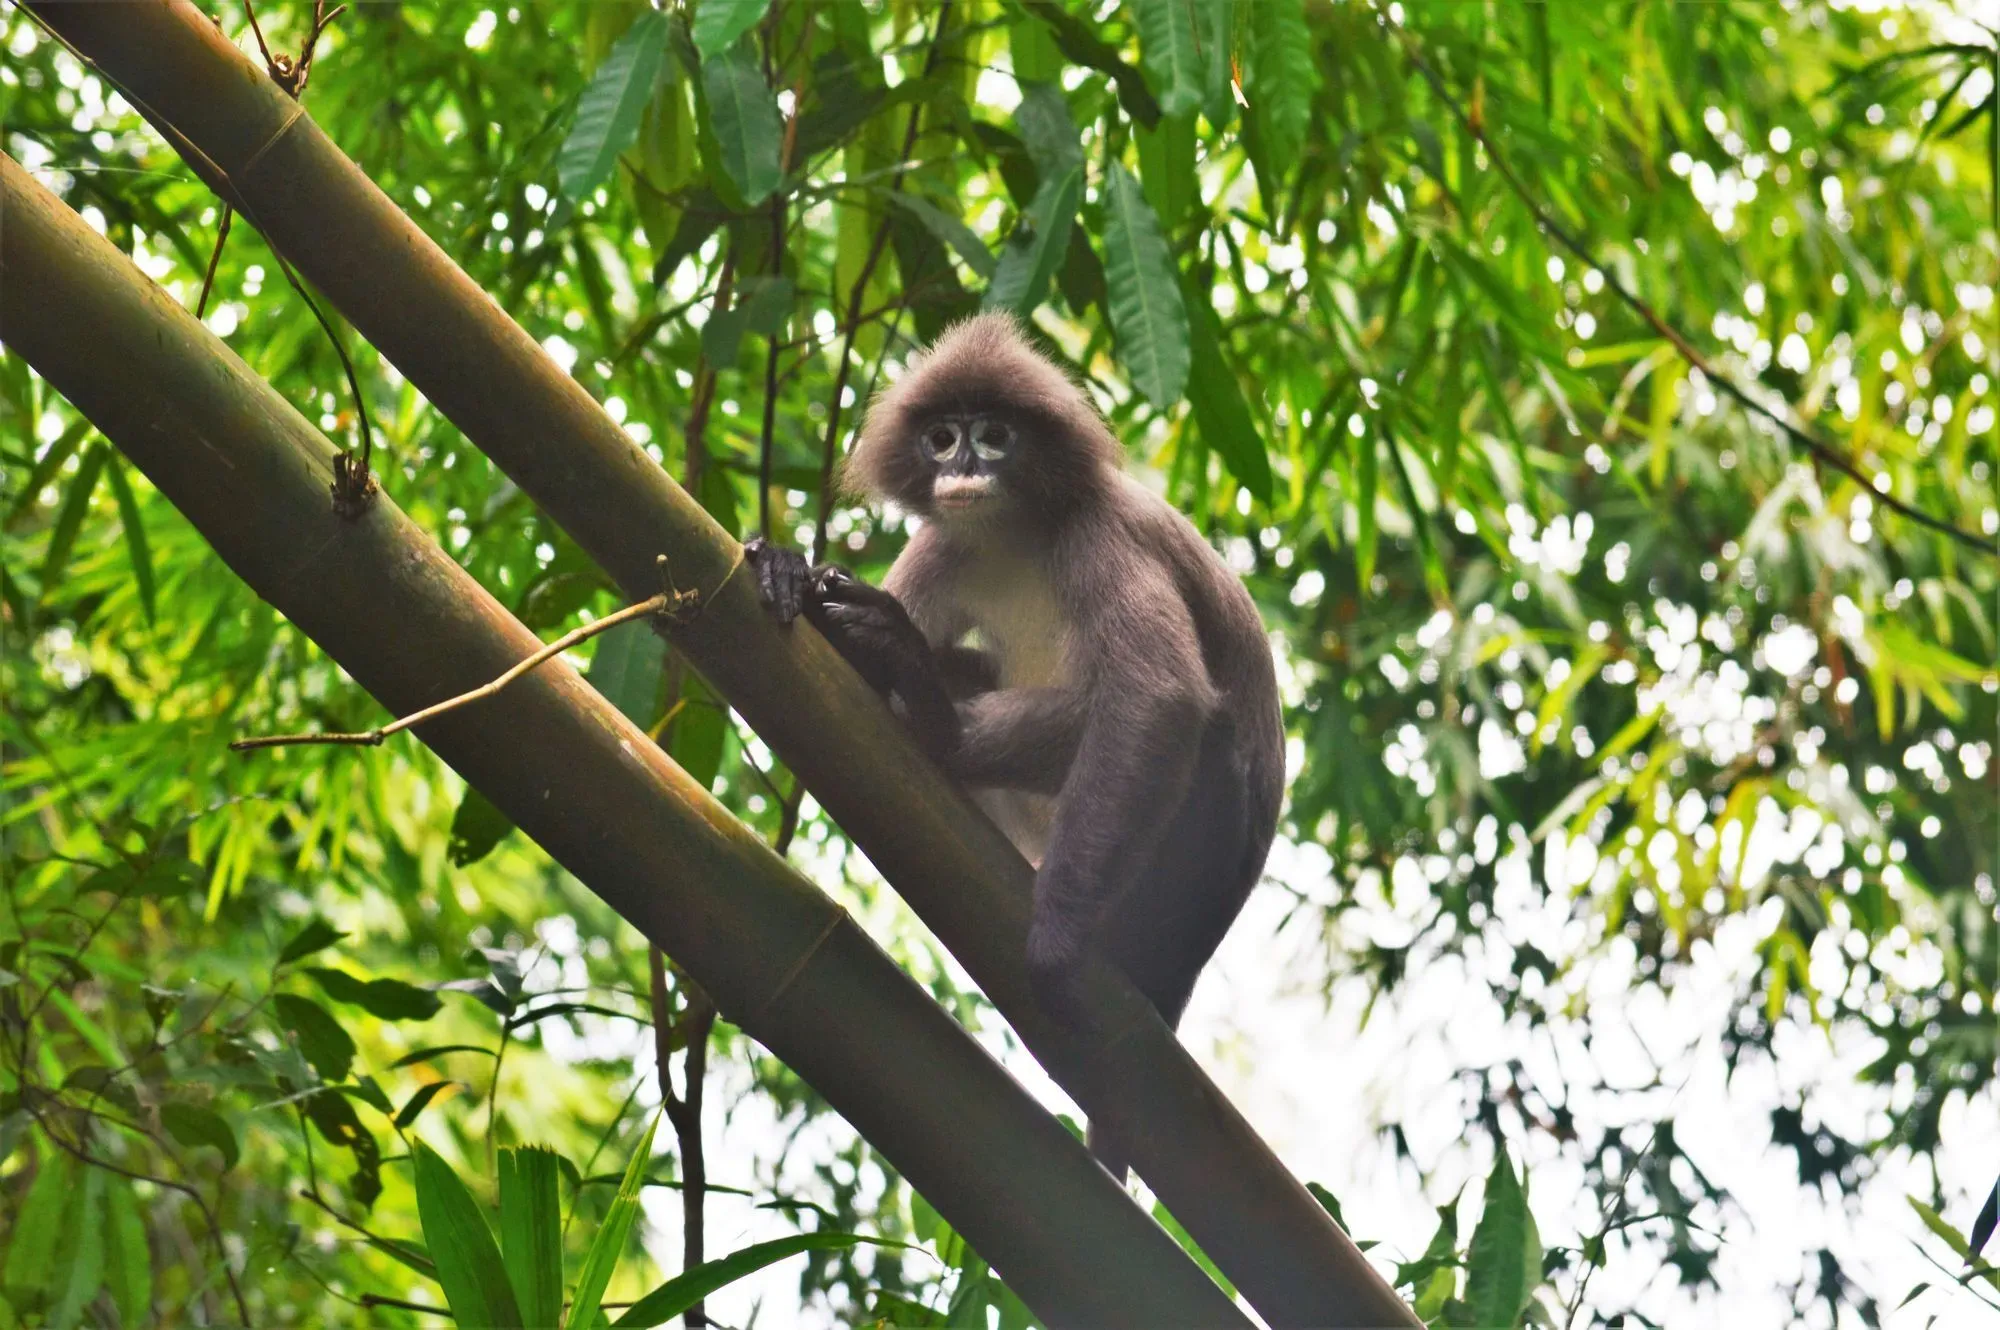 Phayre's leaf monkeys look like they are wearing spectacles.